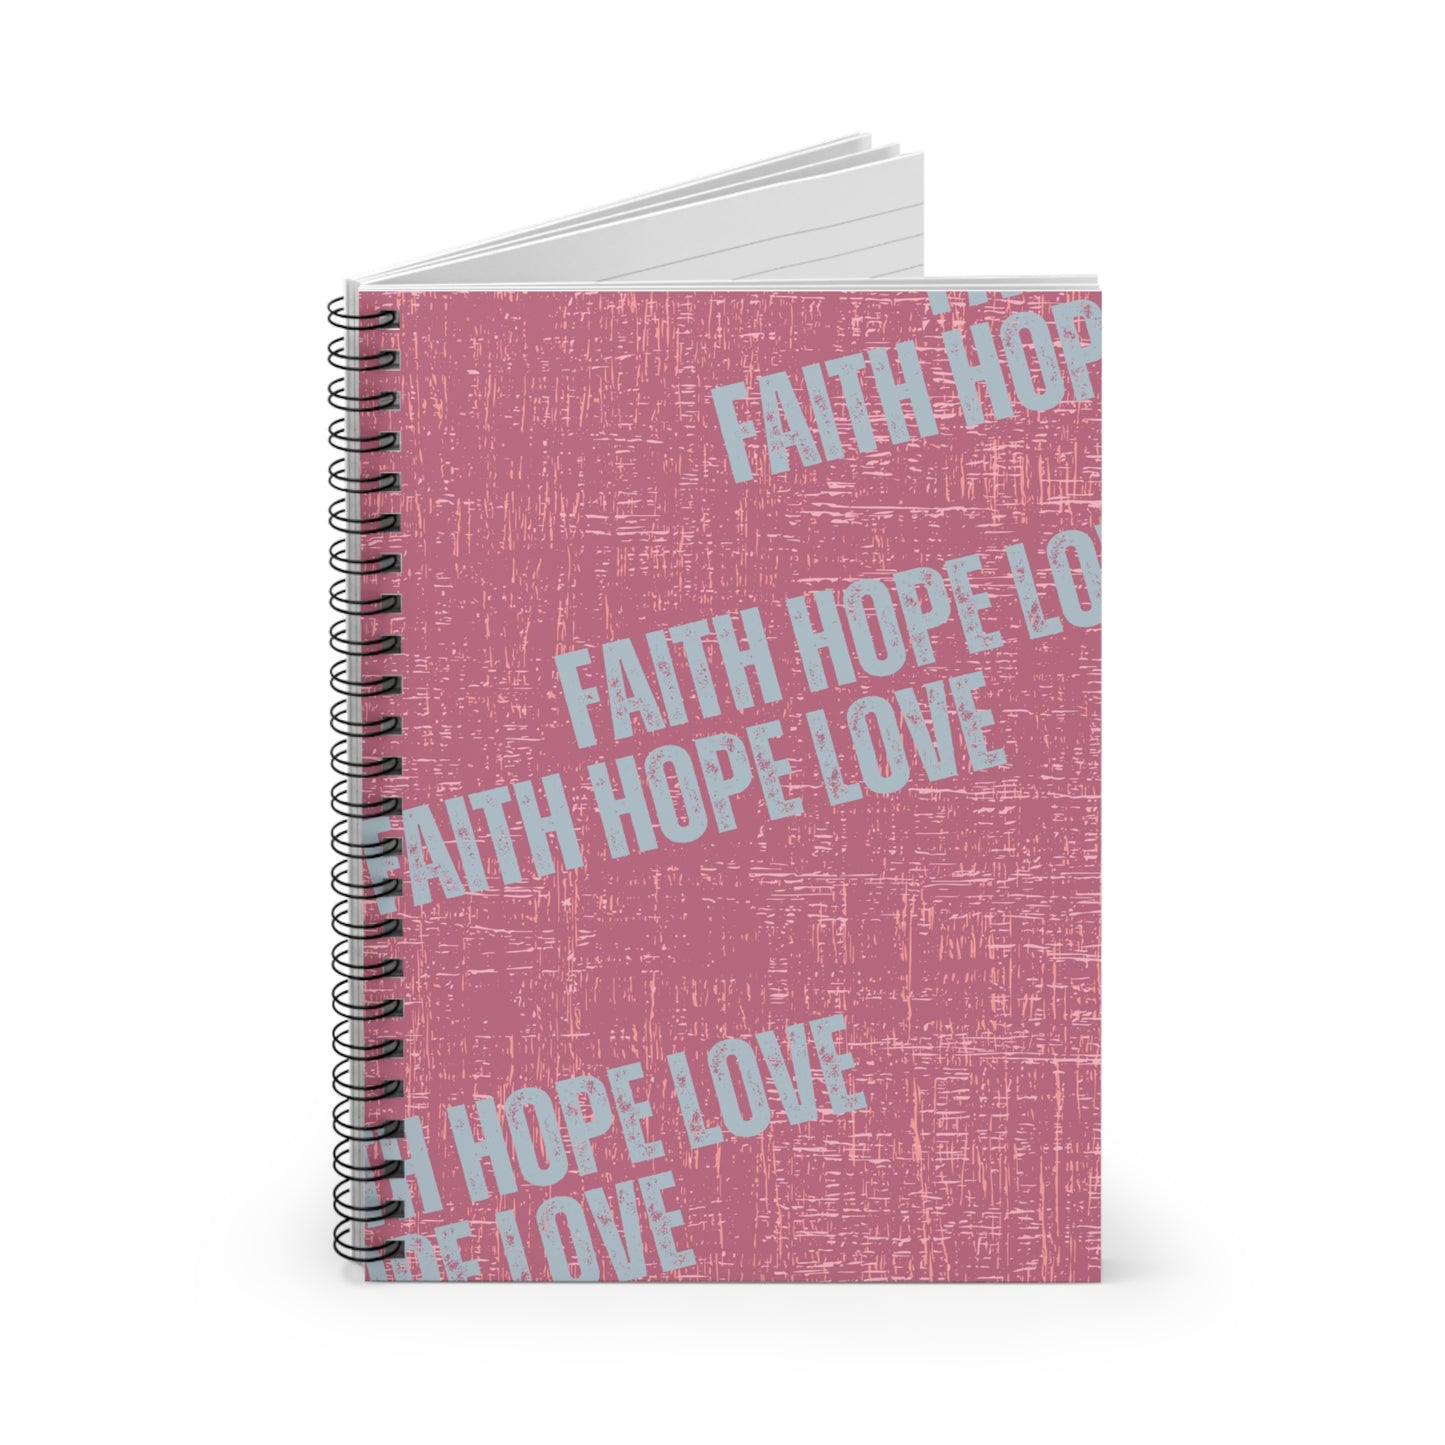 Faith Hope Love: Inspirational Spiral Notebook for Reflections and Musings - Eddy and Rita